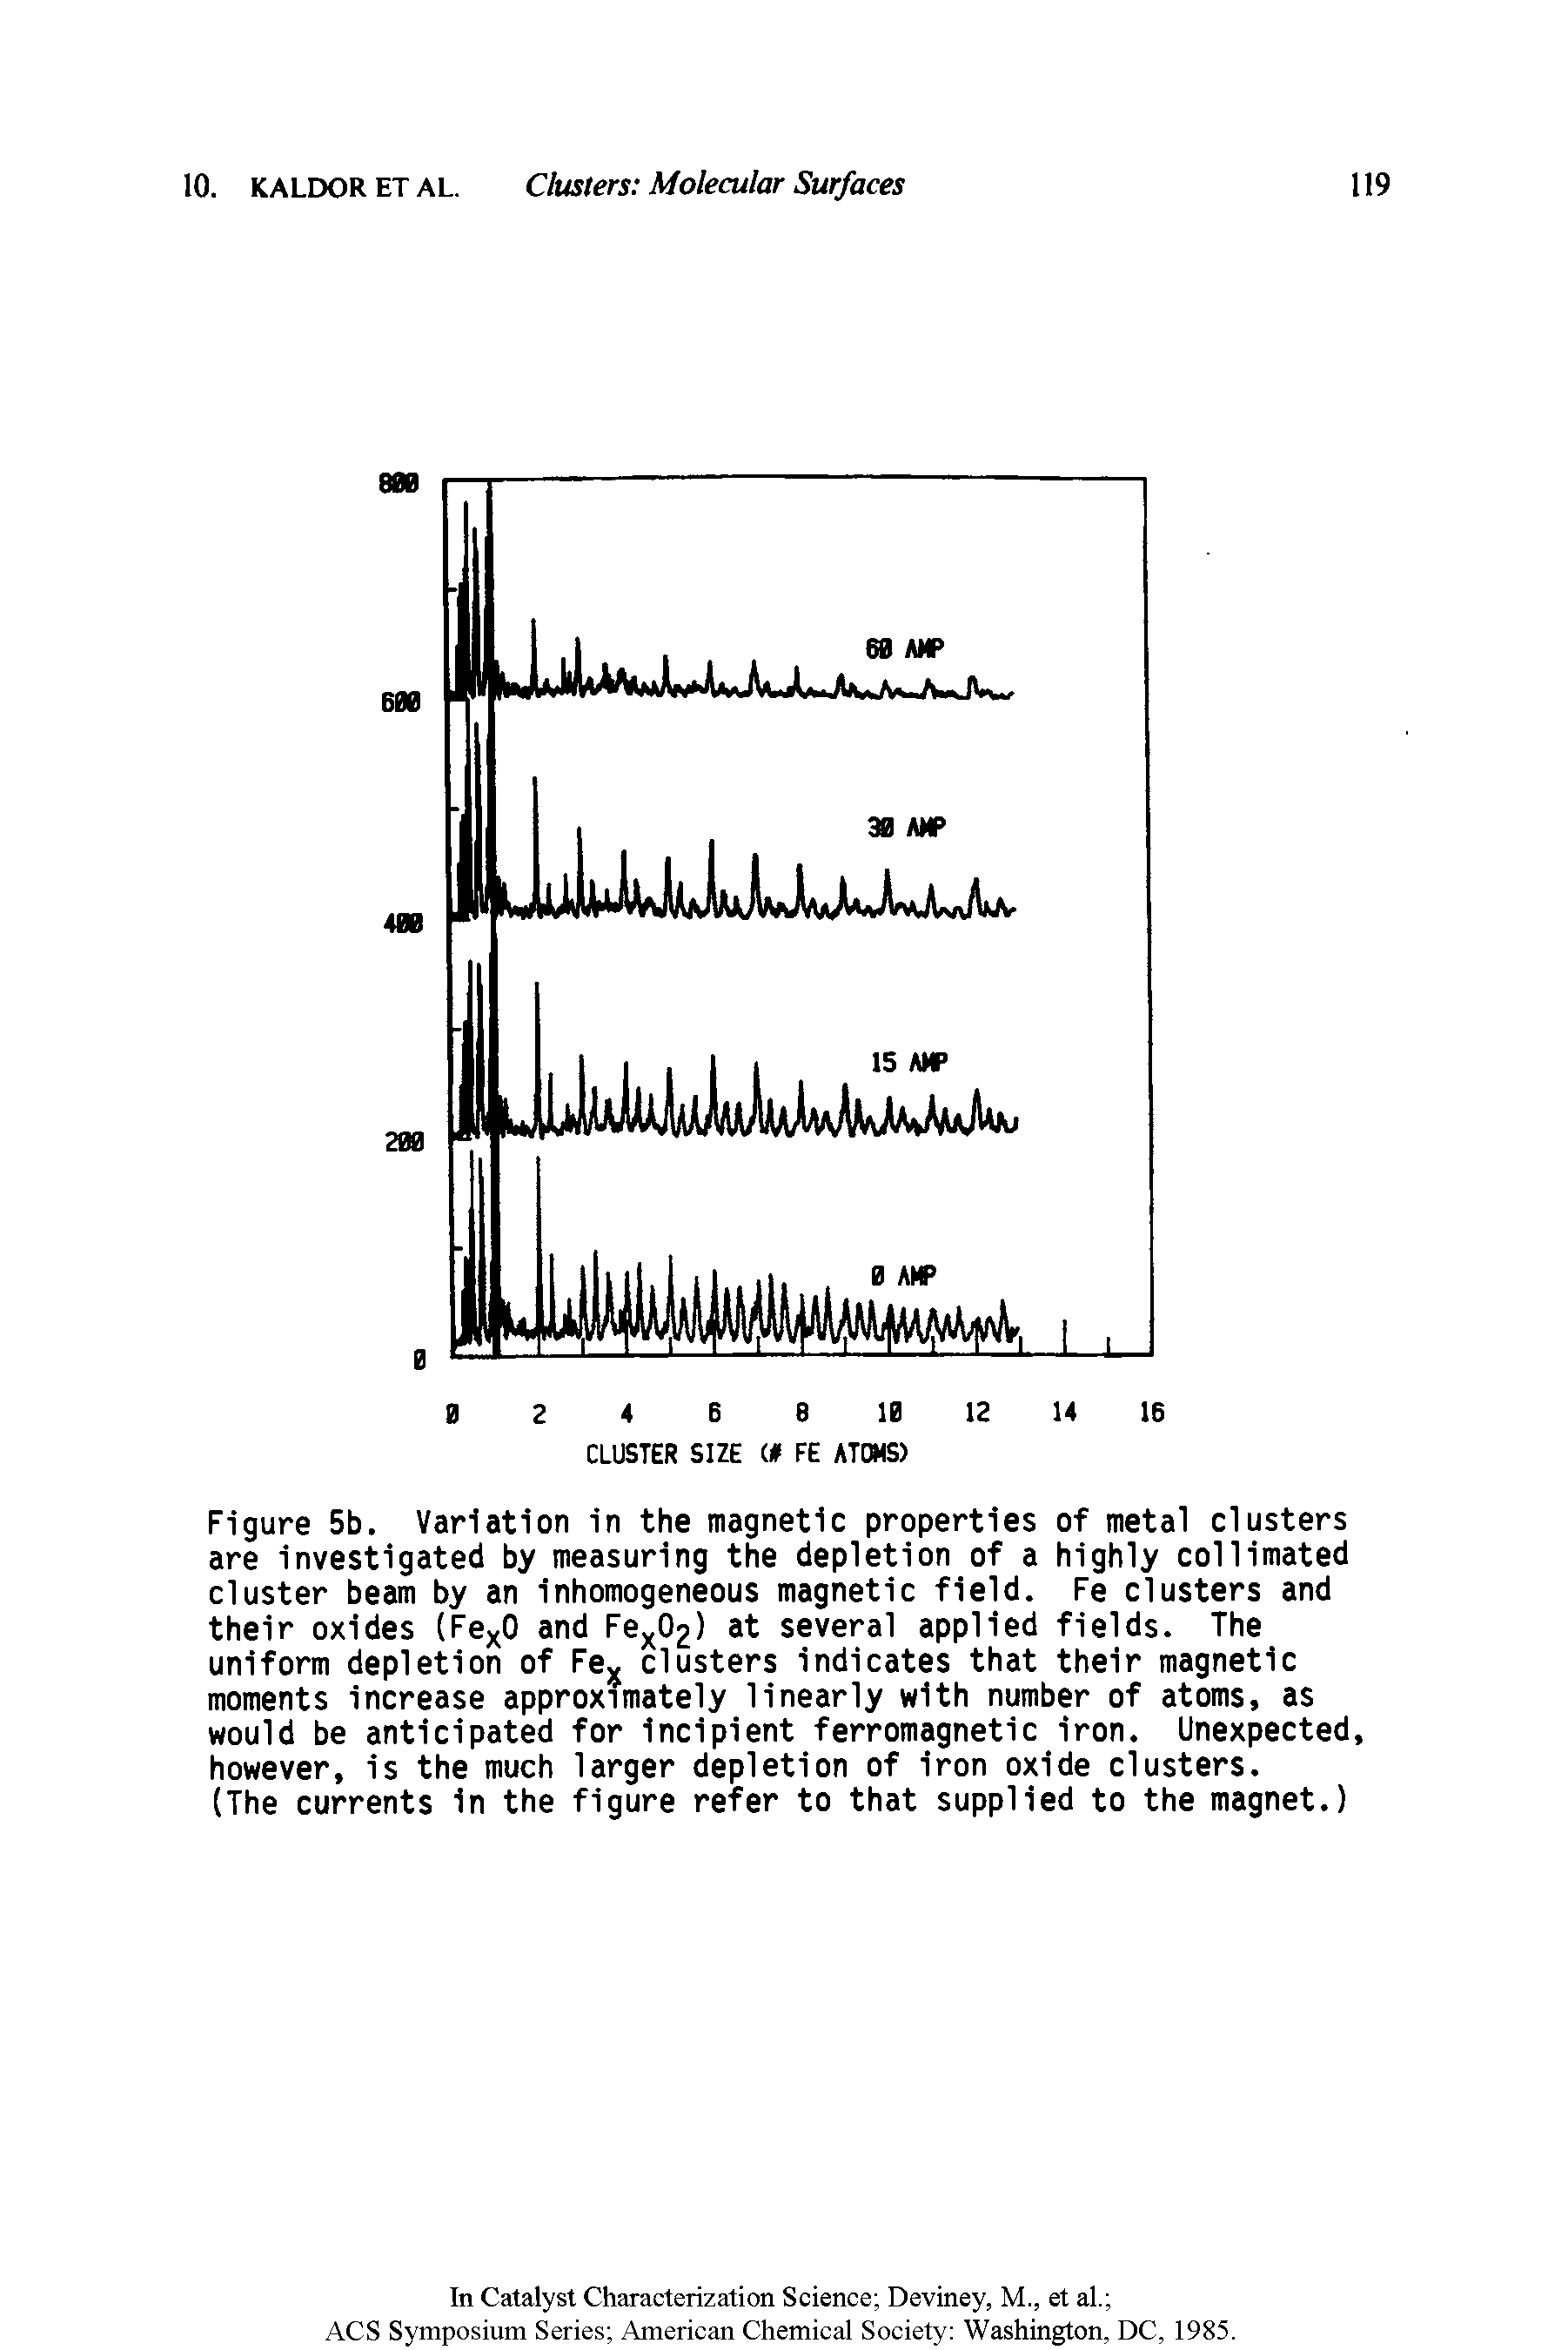 Figure 5b. Variation in the magnetic properties of metal clusters are investigated by measuring the depletion of a highly collimated cluster beam by an inhomogeneous magnetic field. Fe clusters and their oxides (FexO and Fex02) at several applied fields. The uniform depletion of Fe clusters indicates that their magnetic moments increase approximately linearly with number of atoms, as would be anticipated for incipient ferromagnetic iron. Unexpected, however, is the much larger depletion of iron oxide clusters.